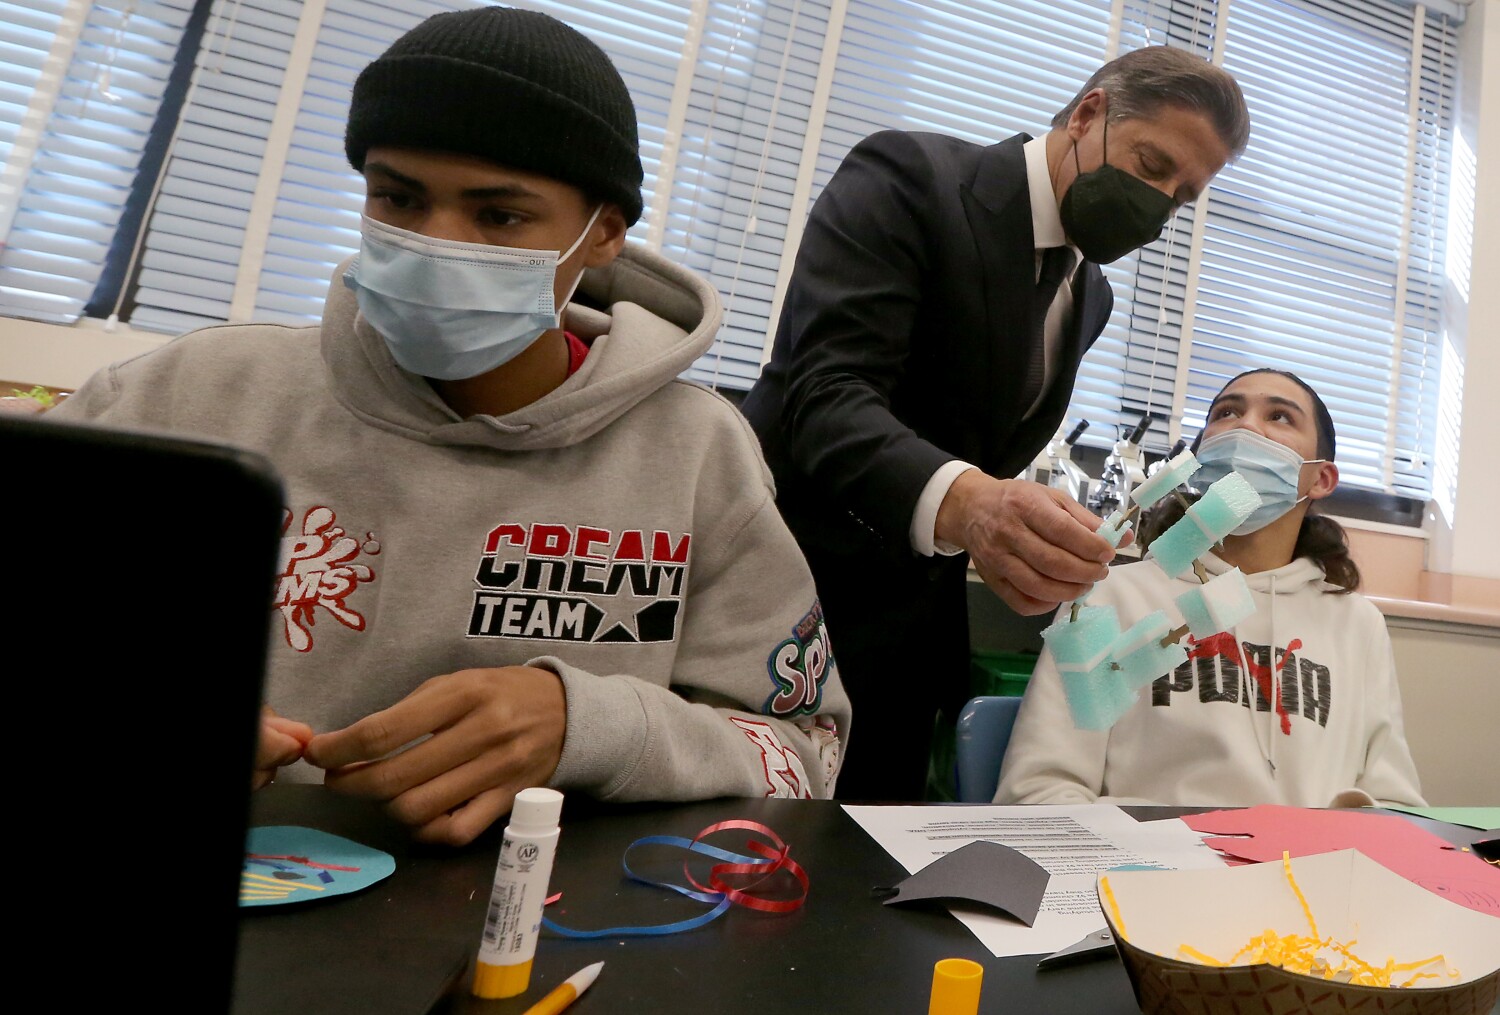 L.A. Unified to lift indoor mask mandate next week in agreement with teachers union